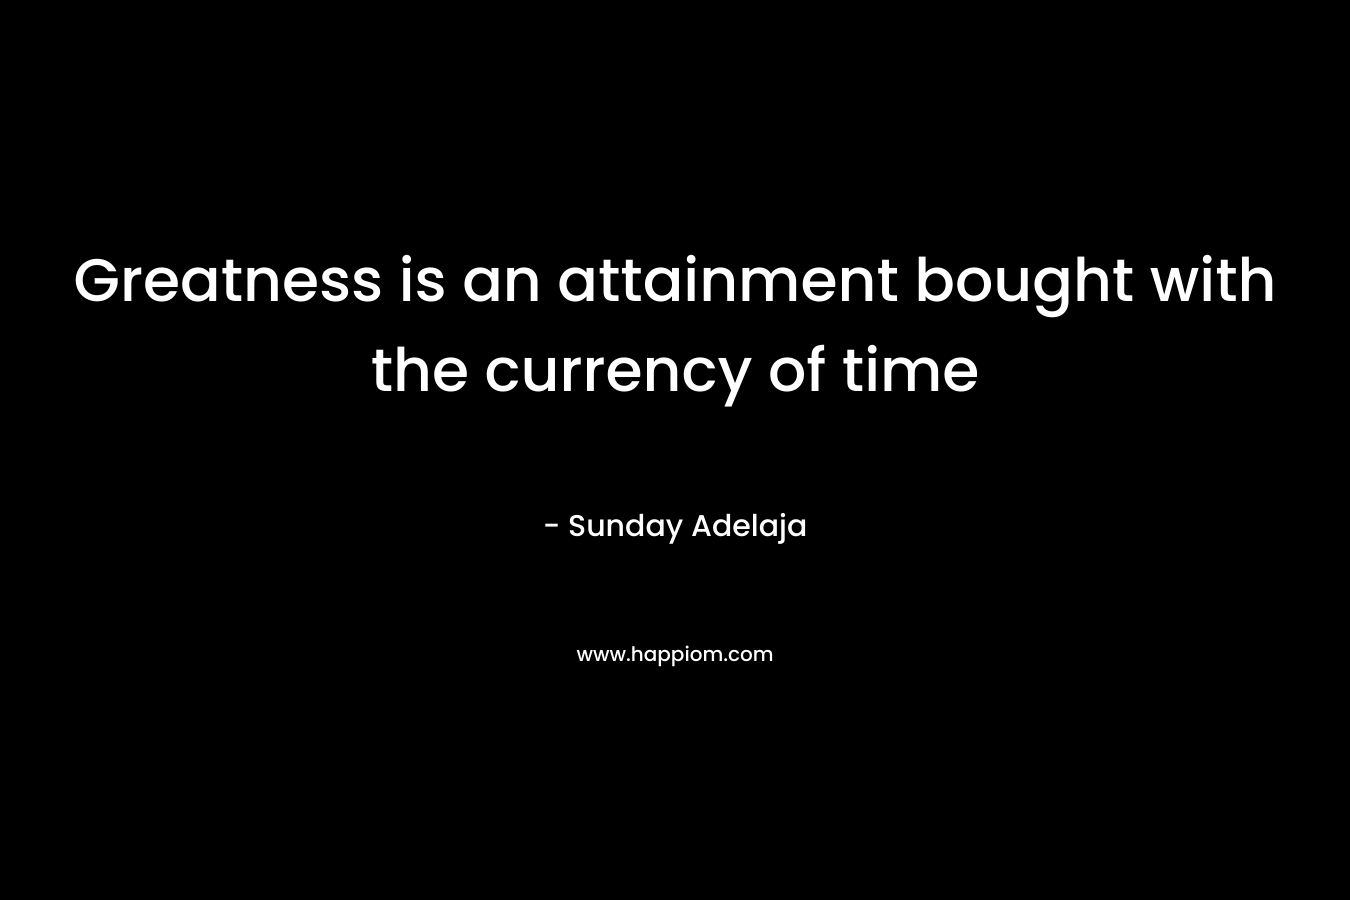 Greatness is an attainment bought with the currency of time